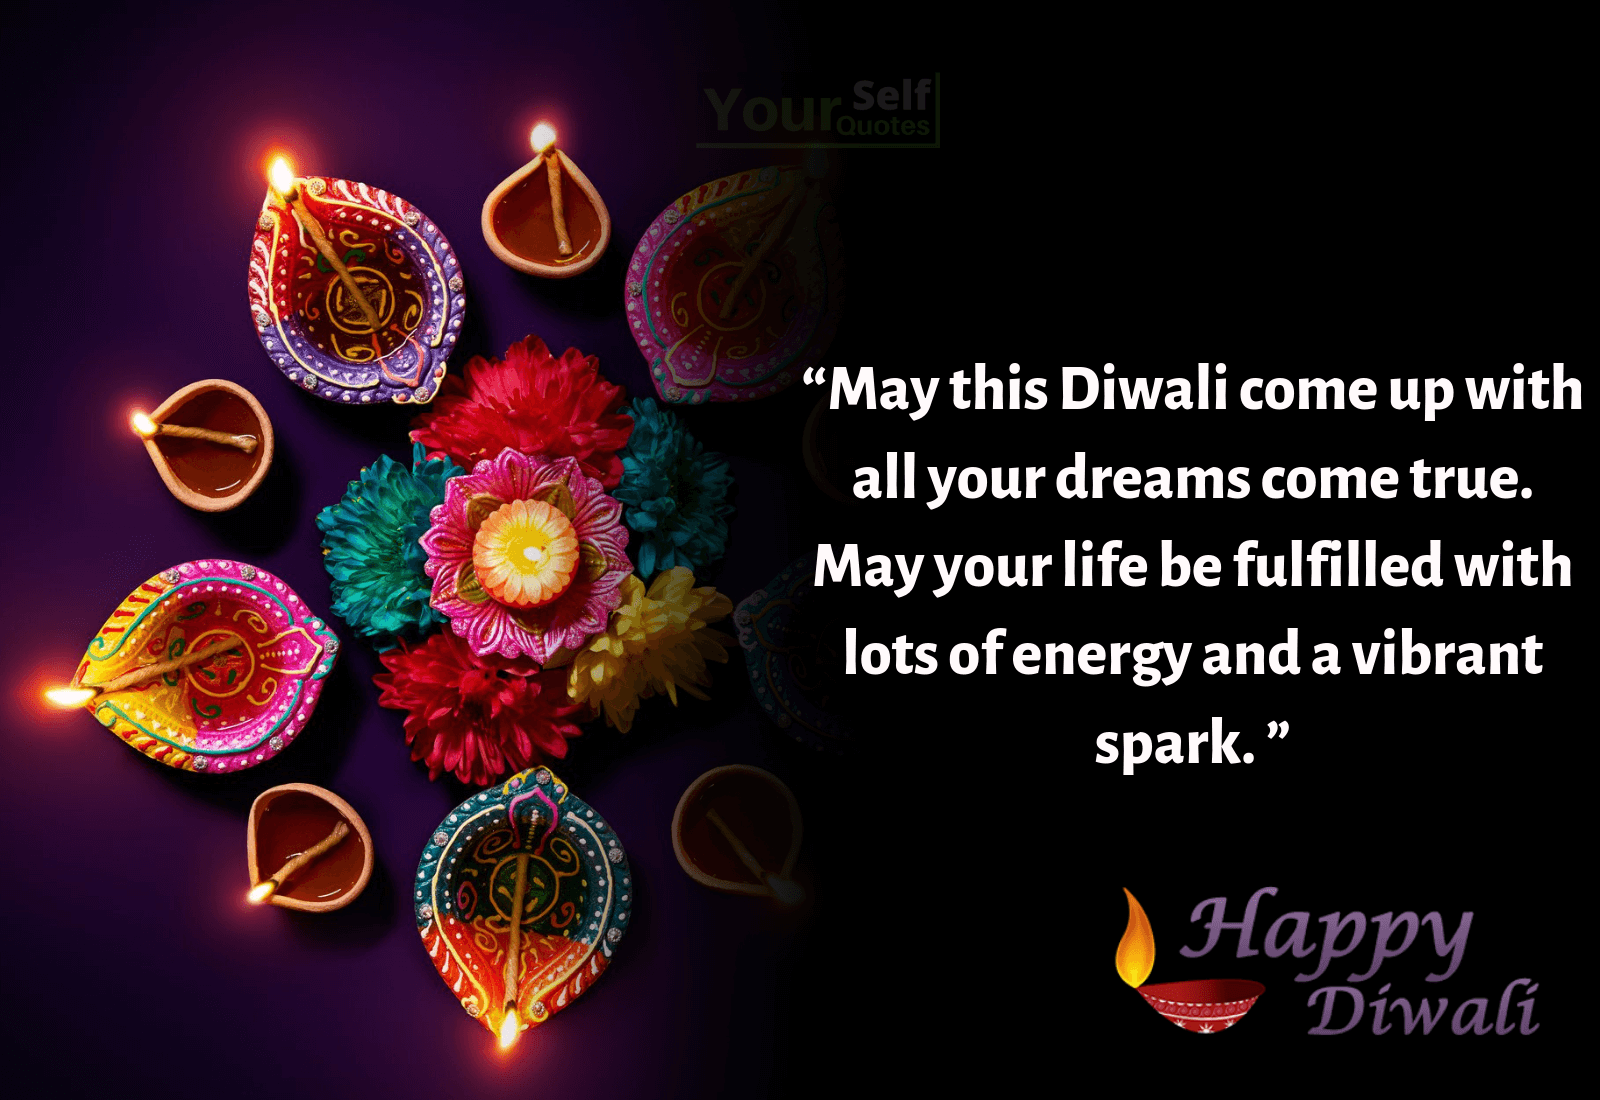 Happy Diwali Wishes Greetings Wallpapers 